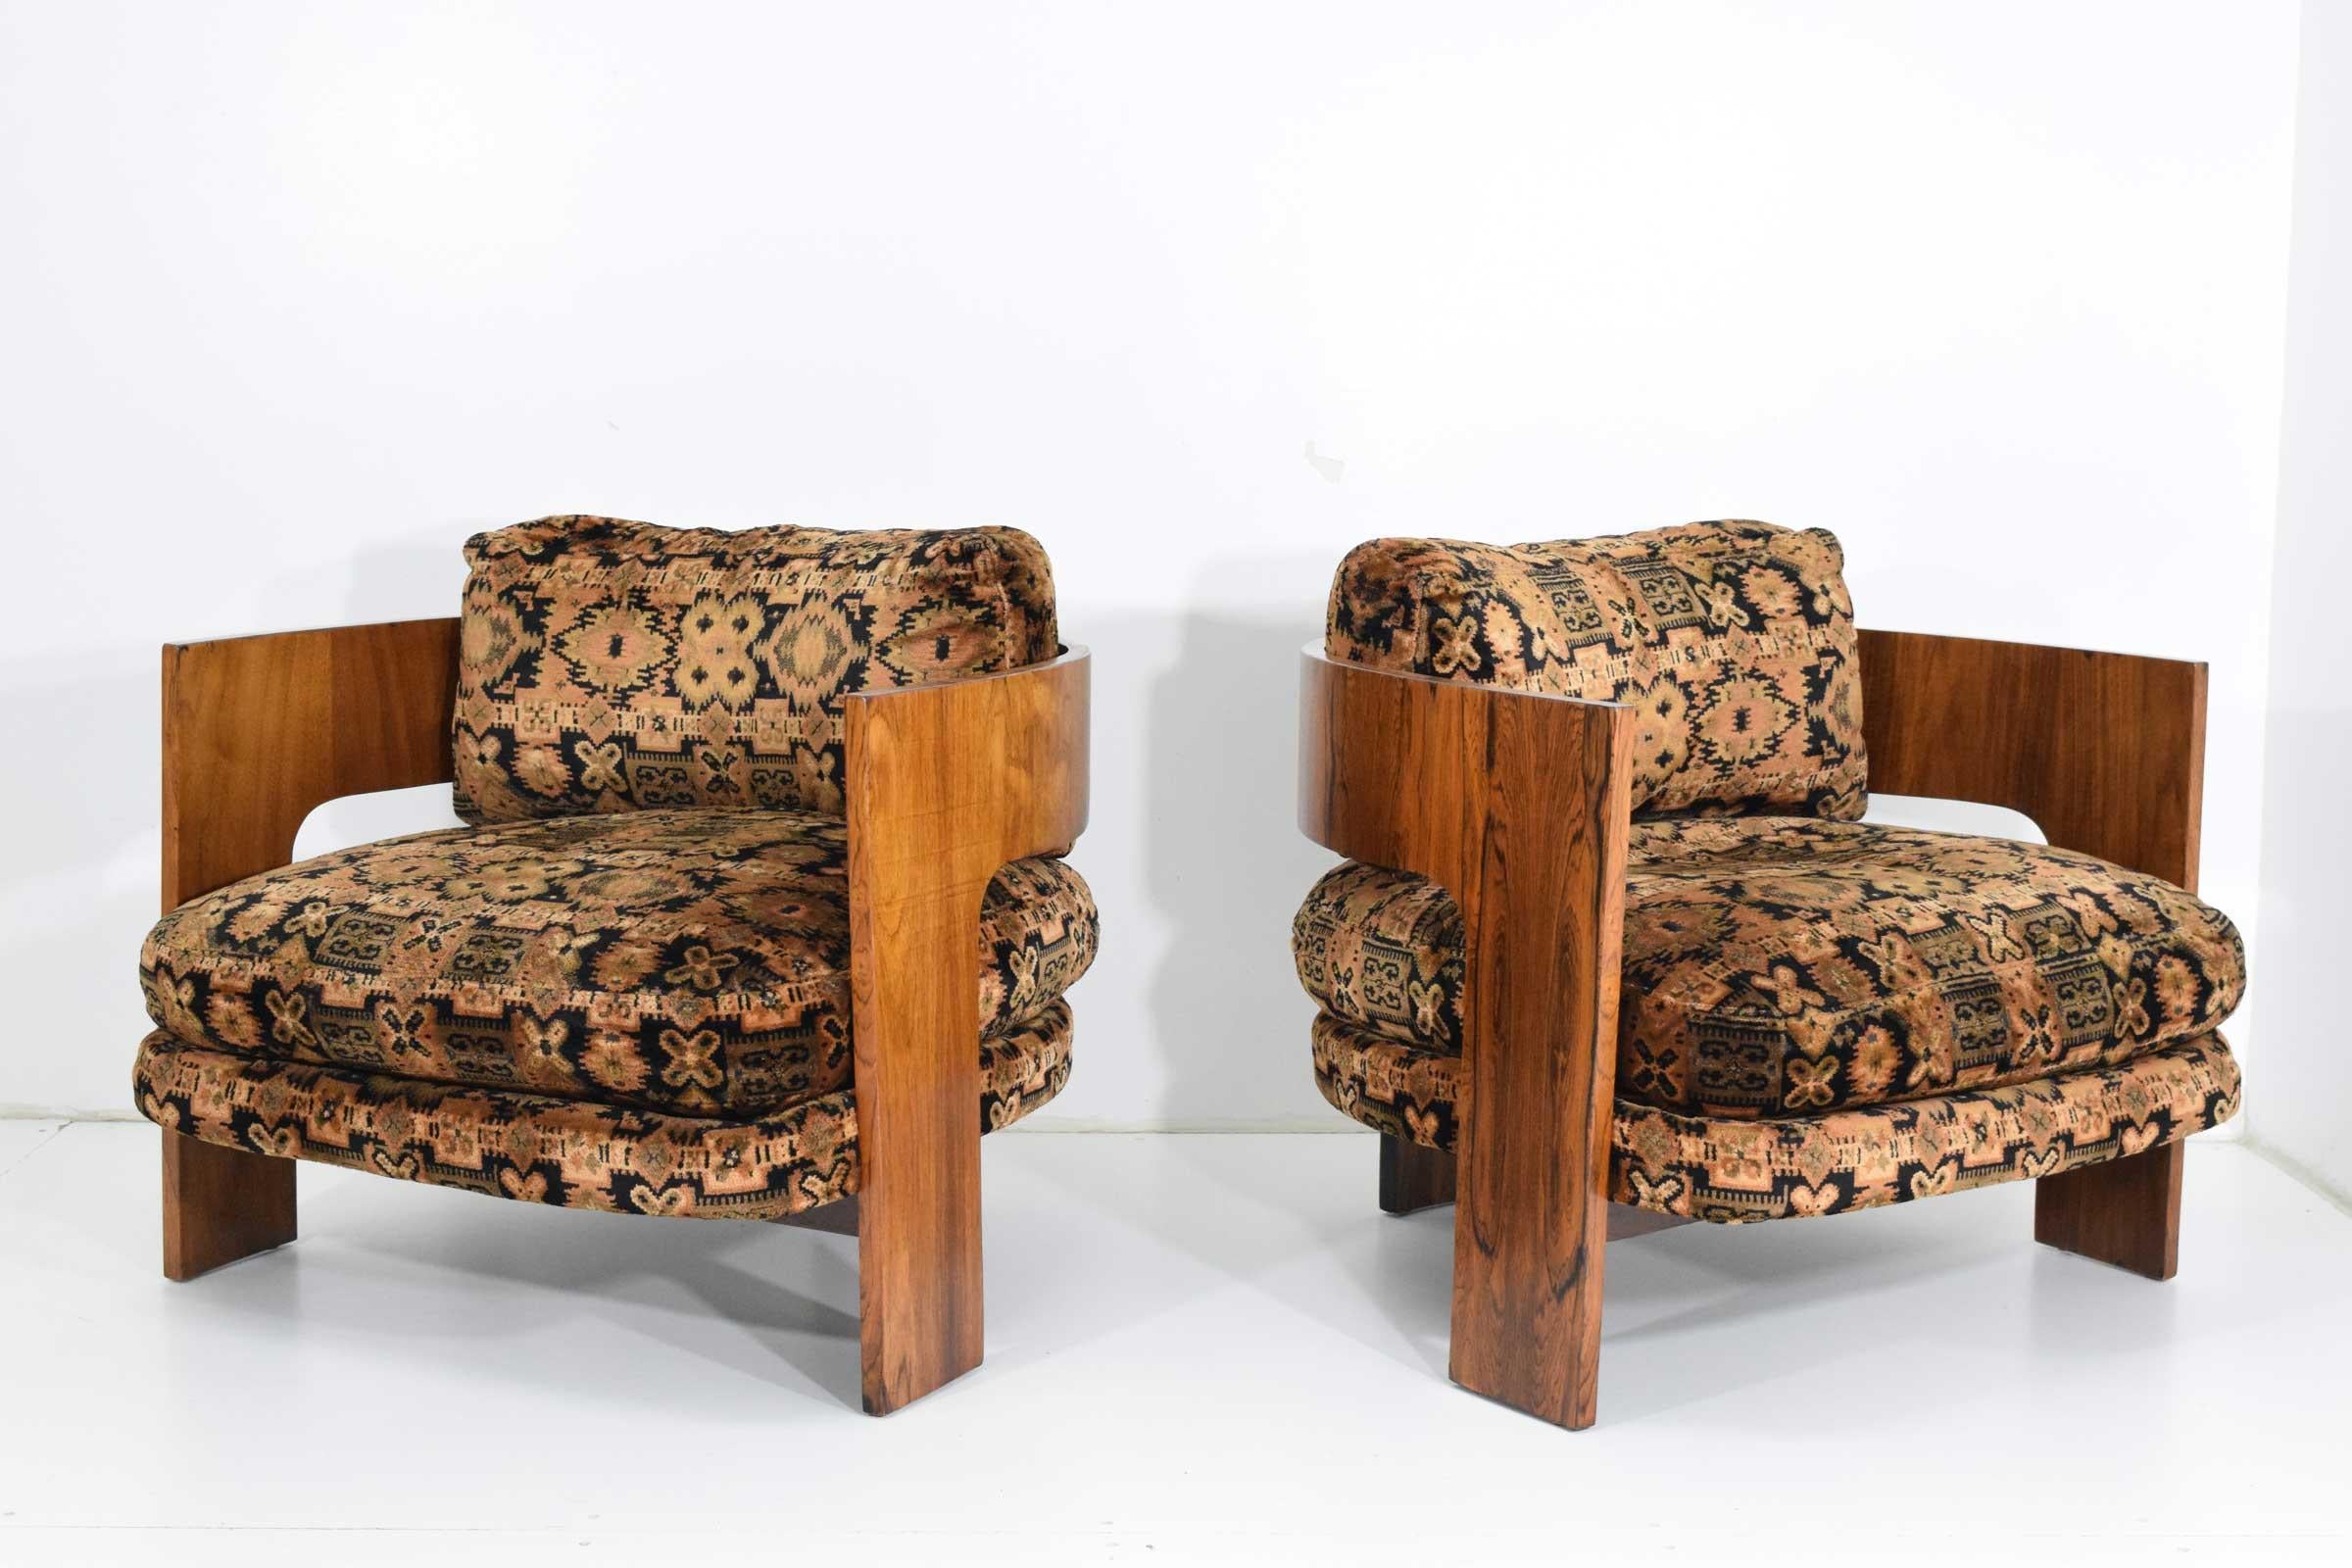 Very rare and difficult to find, a beautiful pair of Milo Baughman for Thayer Coggin T-Frame chairs in rosewood. Dates 1969. We left the original upholstery but we can reupholster for you in your choice of fabric. Existing may be Jack Lenor Larsen